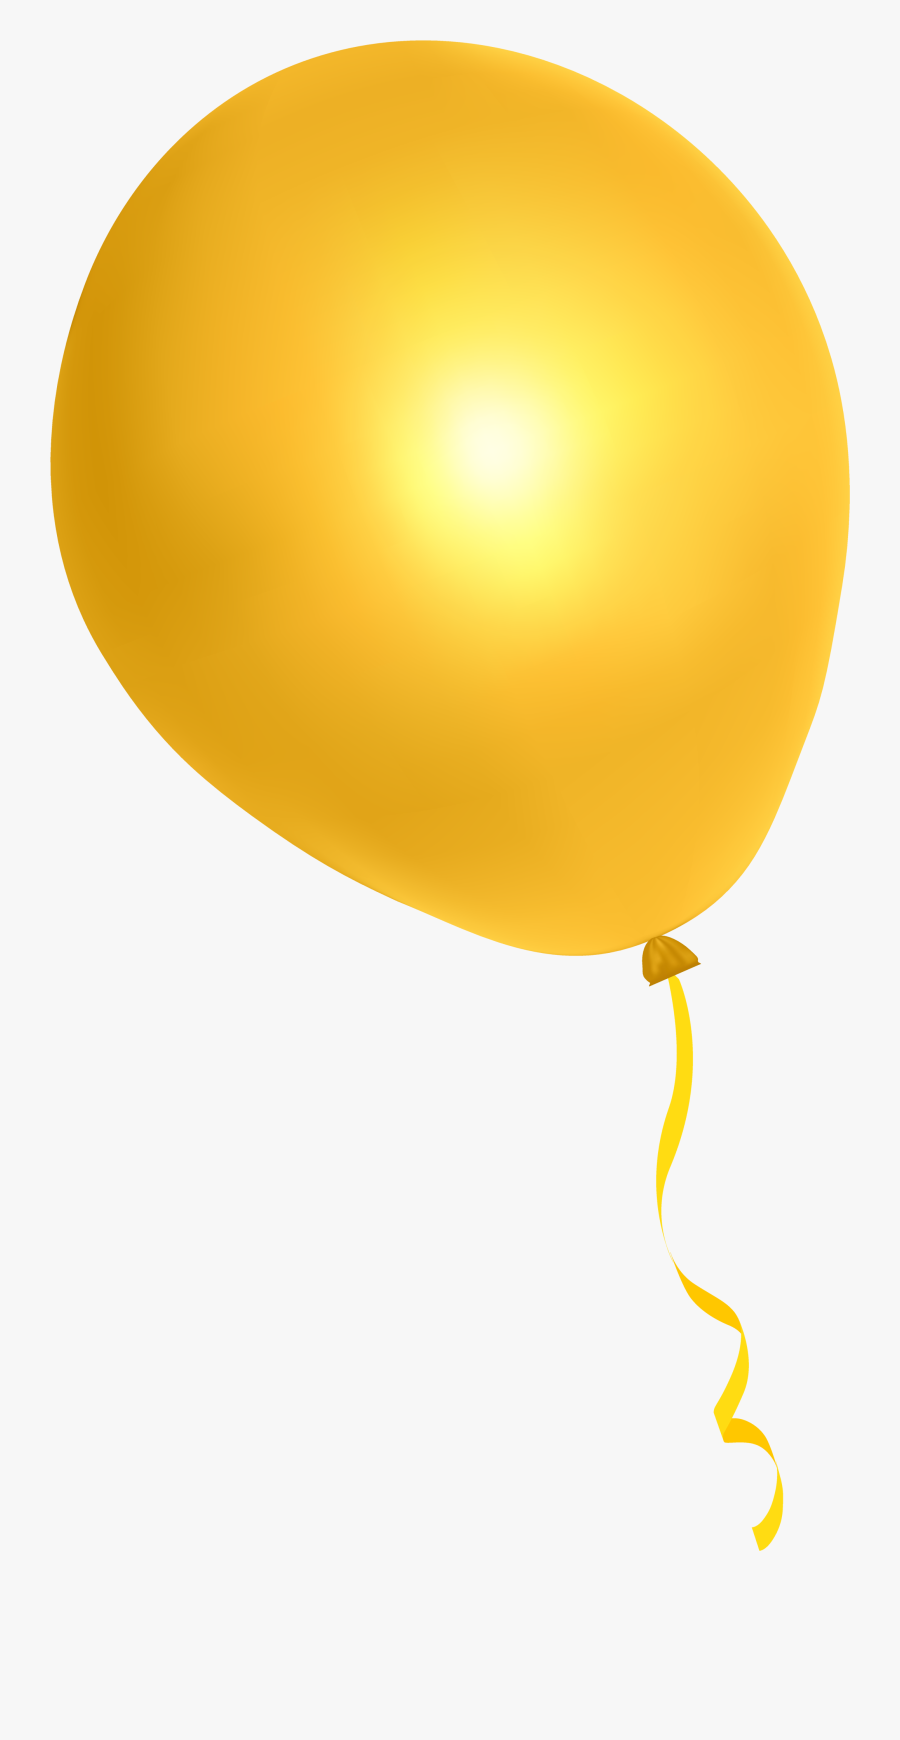 Transparent Background Yellow Balloon Png, Transparent Clipart